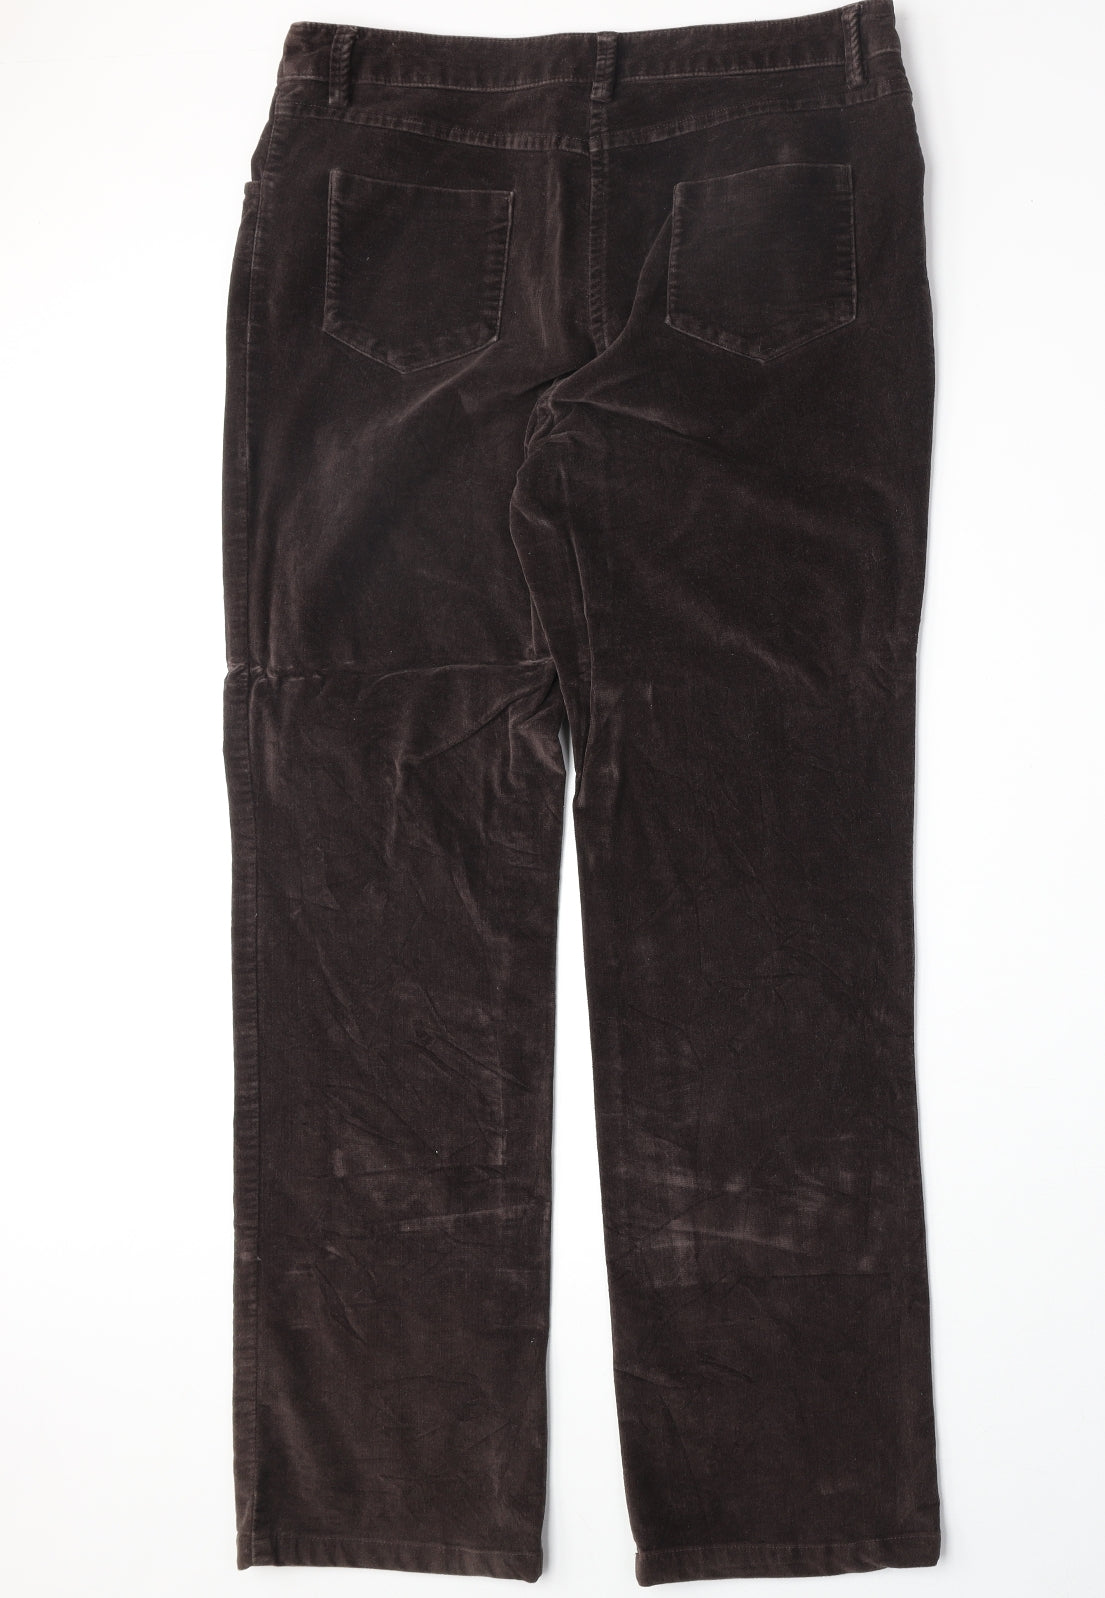 Marks and Spencer Womens Brown Cotton Trousers Size M Regular Zip